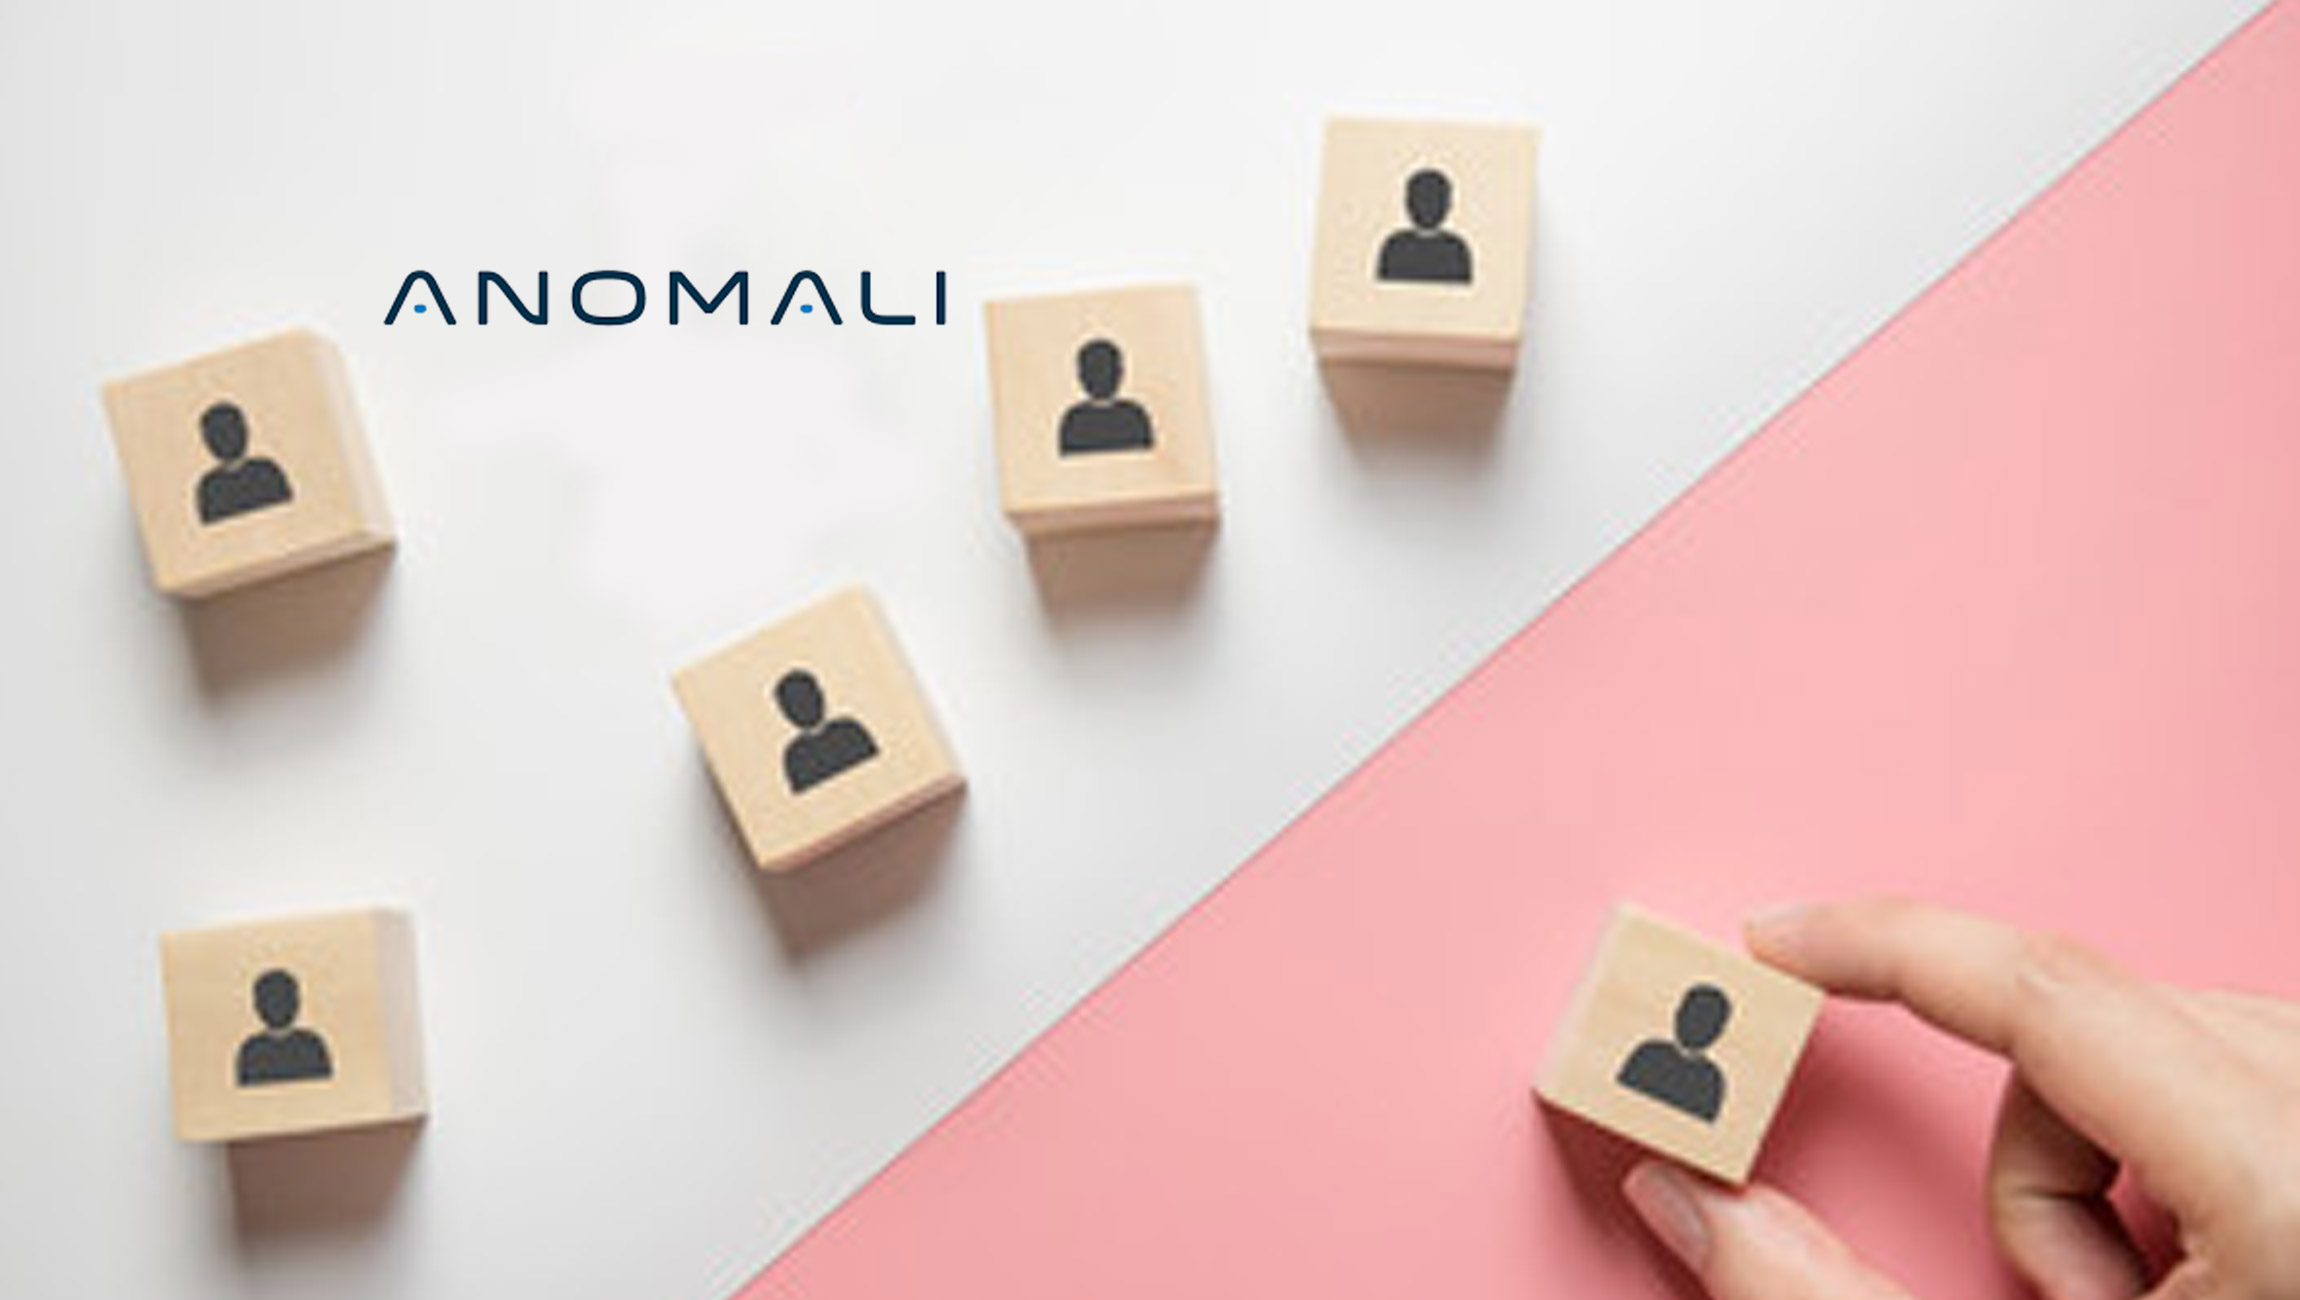 Anomali Appoints Cyber Security Expert Steve Benton as Vice President and General Manager to Expand Growth of Anomali Intelligence-Driven Solutions